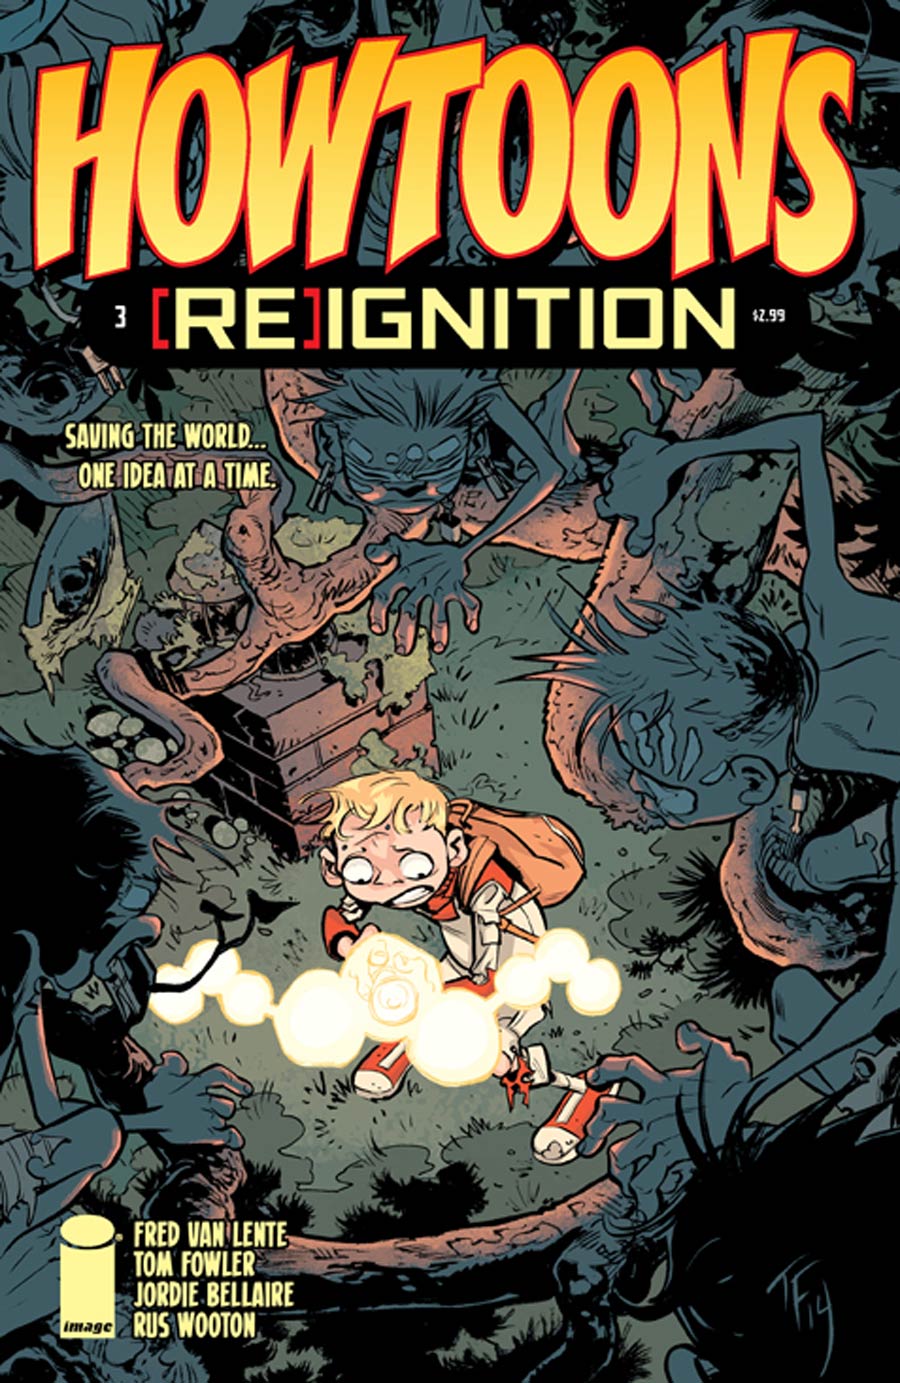 Howtoons (Re)Ignition #3